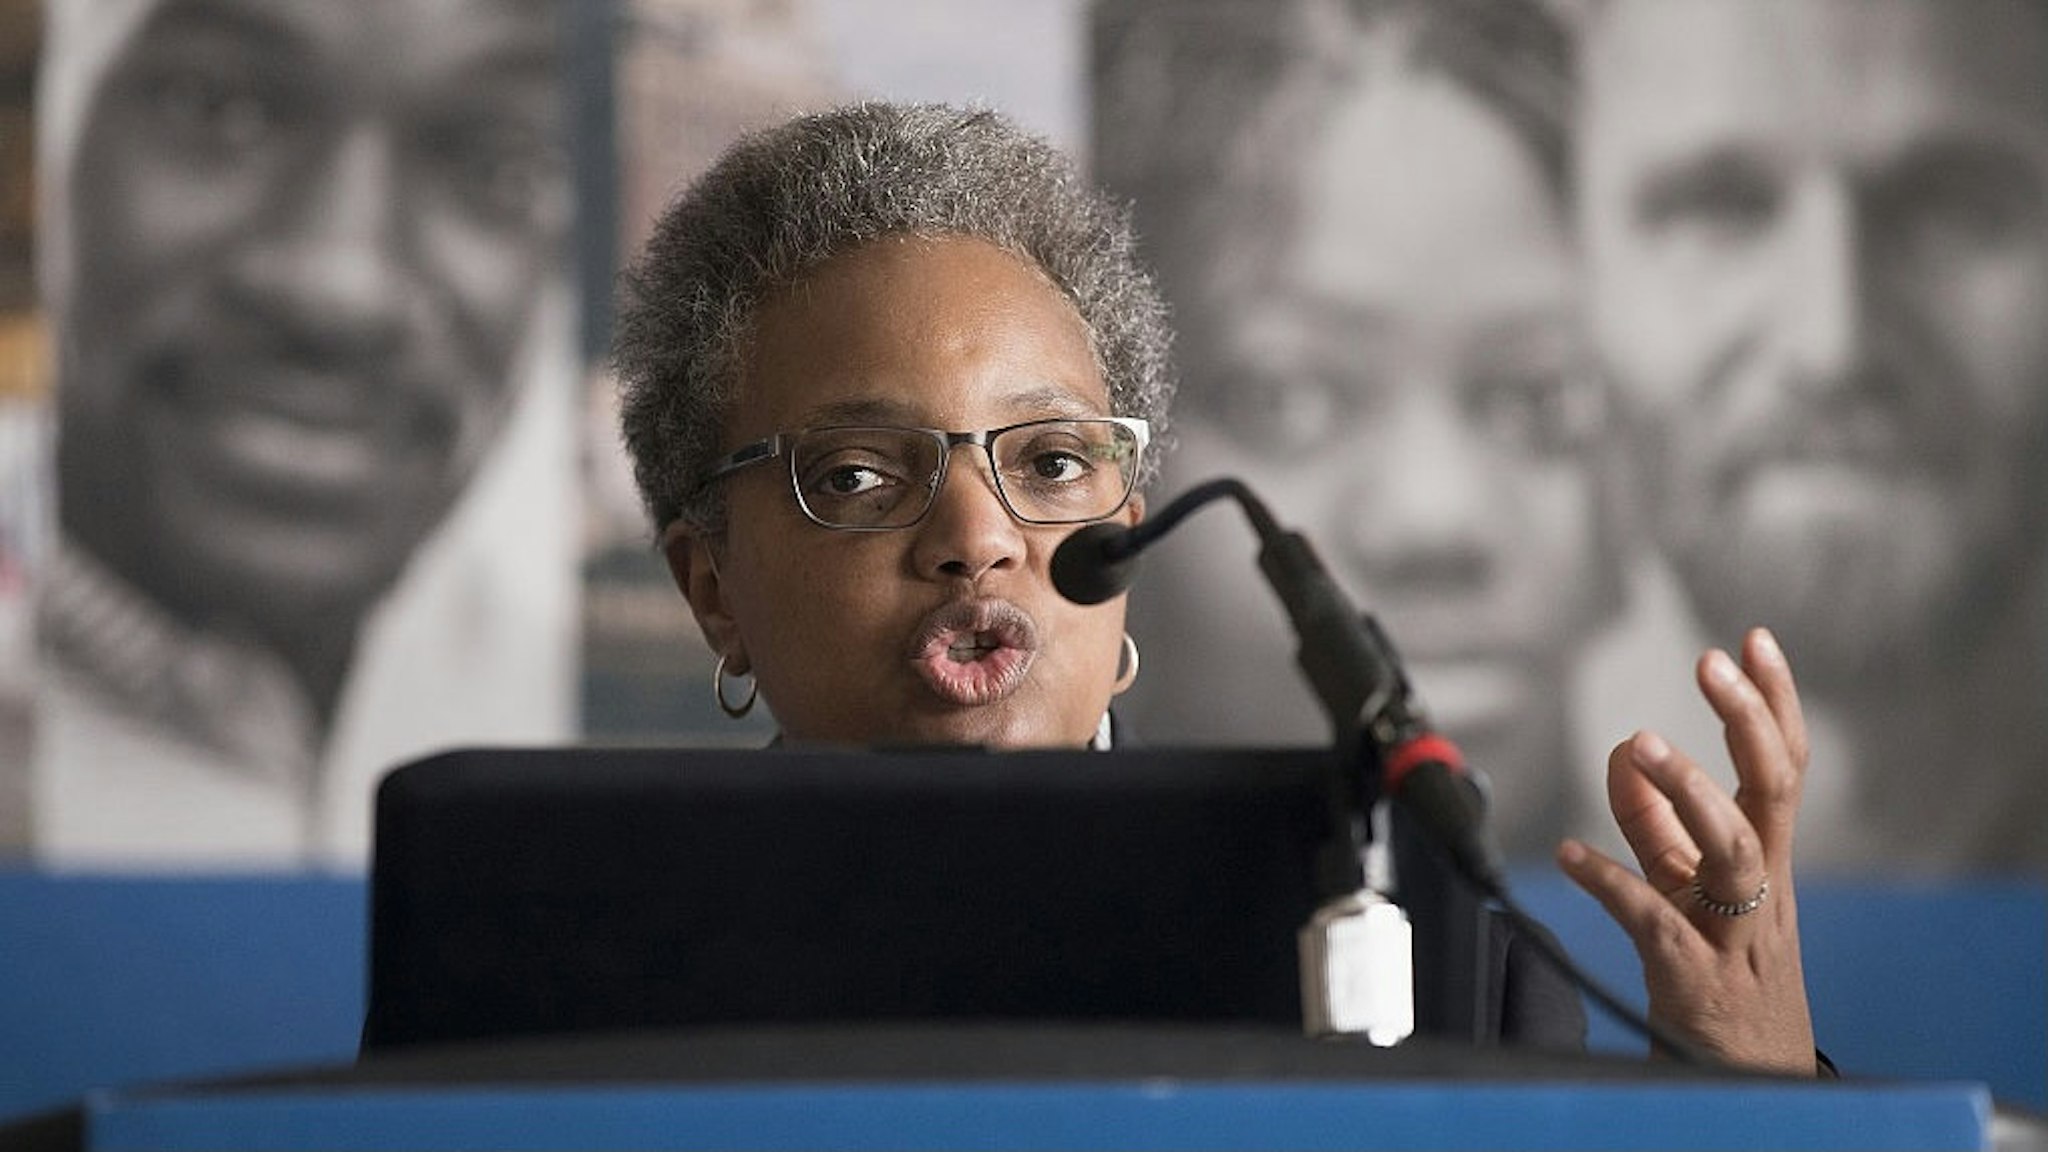 Task Force Finds Entrenched Racism In Chicago Police Department CHICAGO, IL - APRIL 13: Lori Lightfoot, chair of the Chicago Police Board, addresses community leaders and members of the news media about the findings of the Police Accountability Task Force on April 13, 2016 in Chicago, Illinois. The task force found the Chicago Police Department was plagued by systematic racism and had lost the trust of the community. (Photo by Scott Olson/Getty Images)